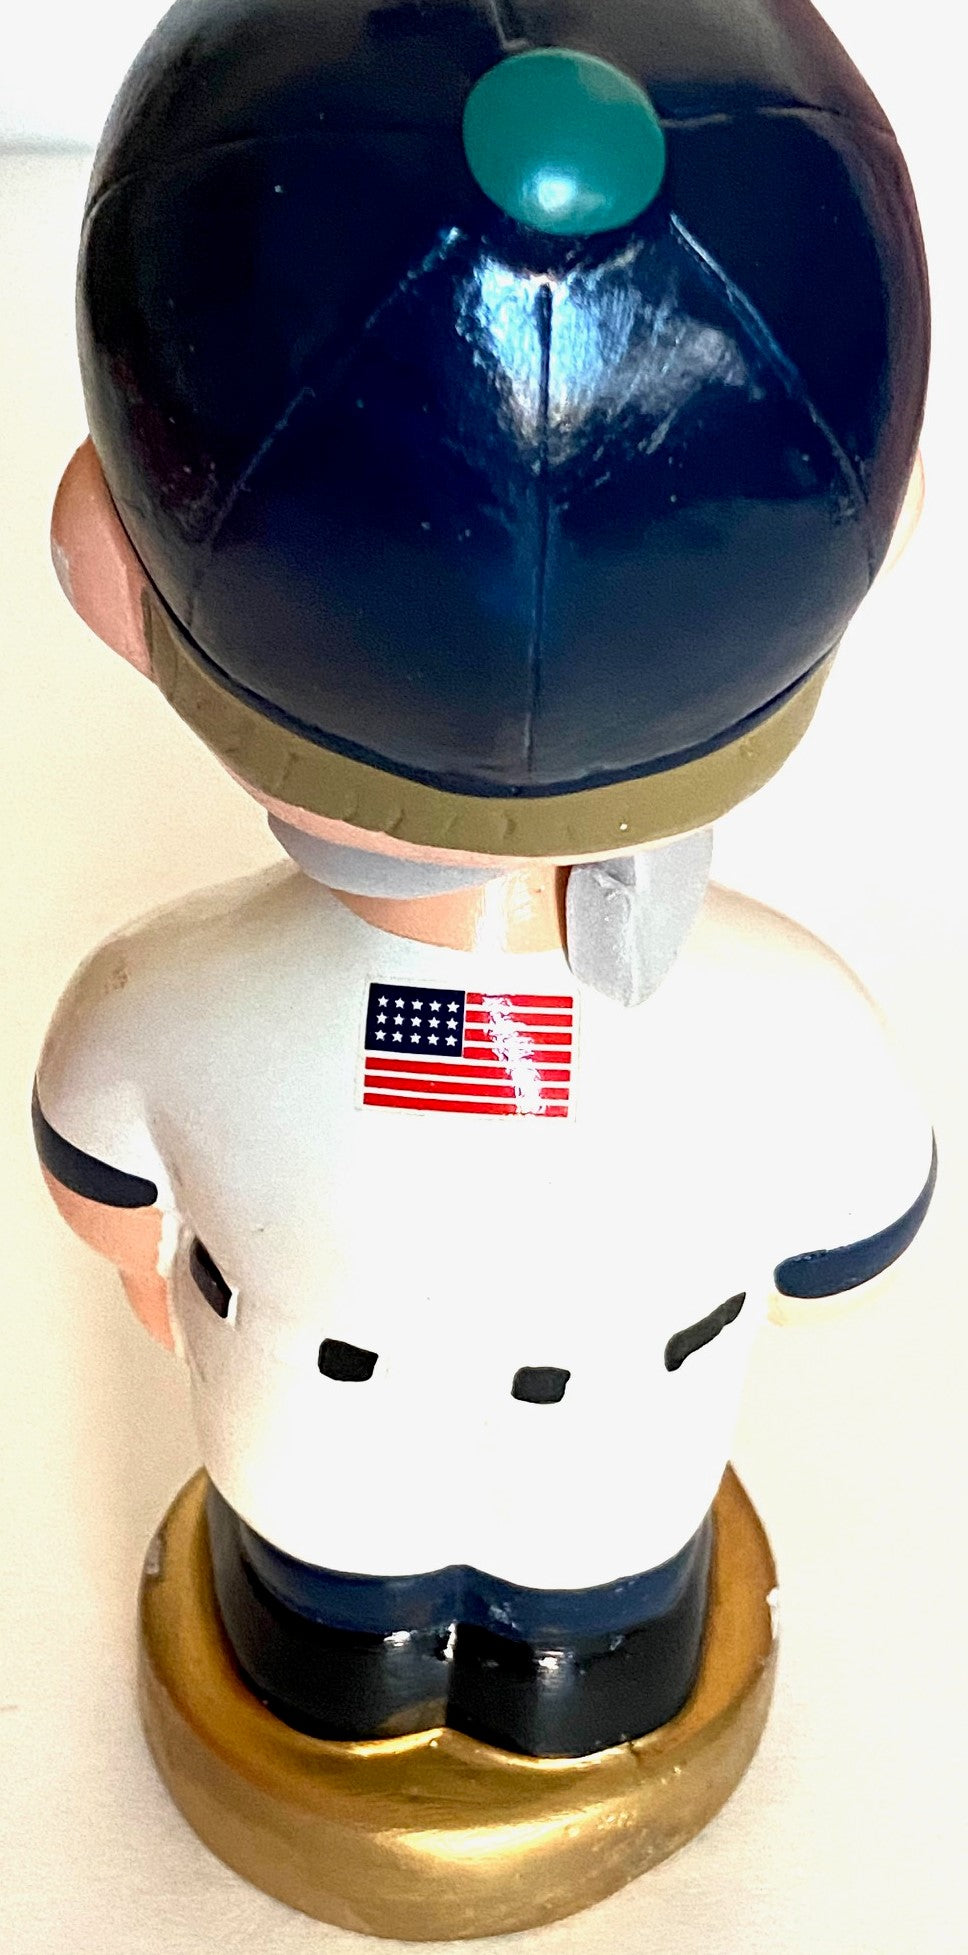 Seattle Mariners 2002 MLB "Boy" Bobblehead (New/Blemishes) by Twins Enterprise